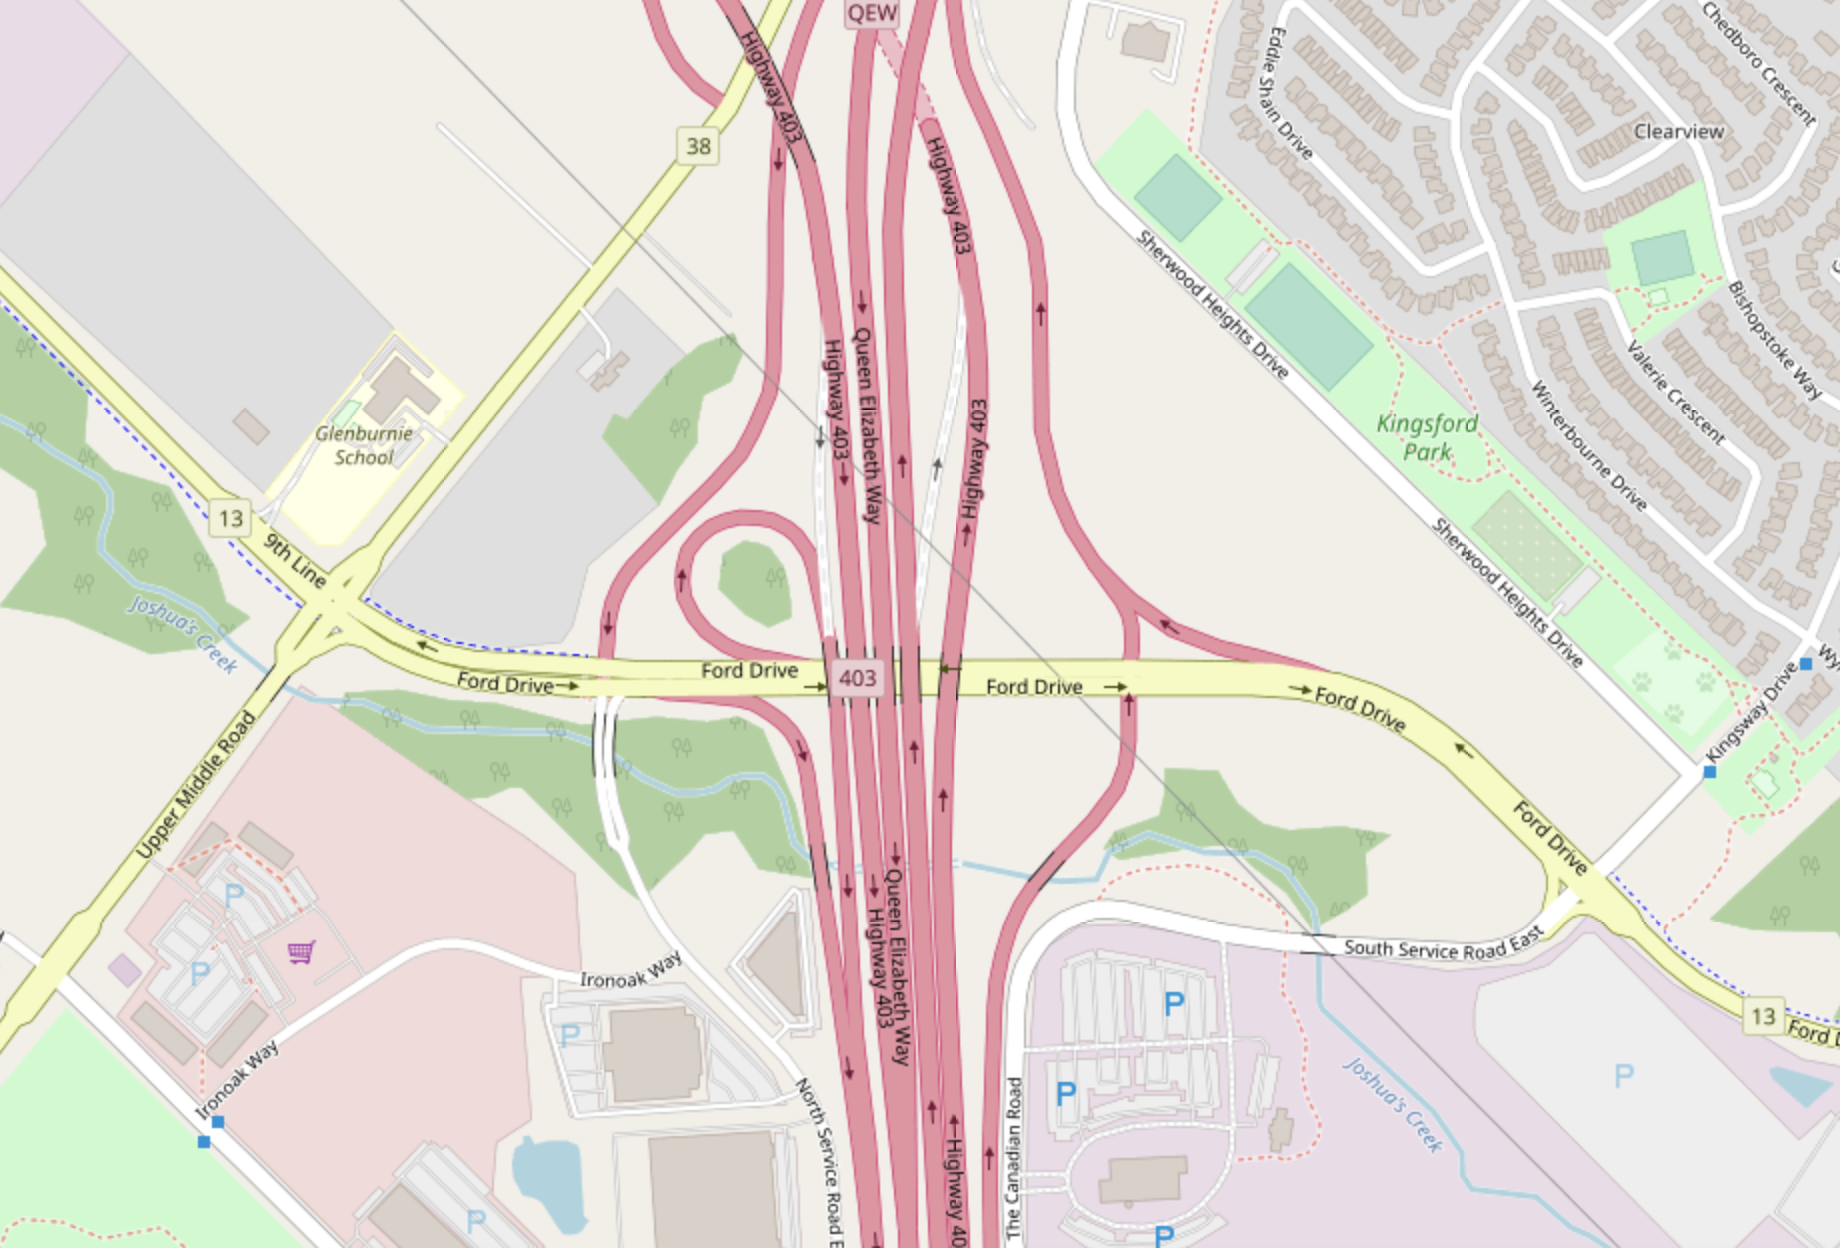 QEW, around Ford Drive | Openstreetmap